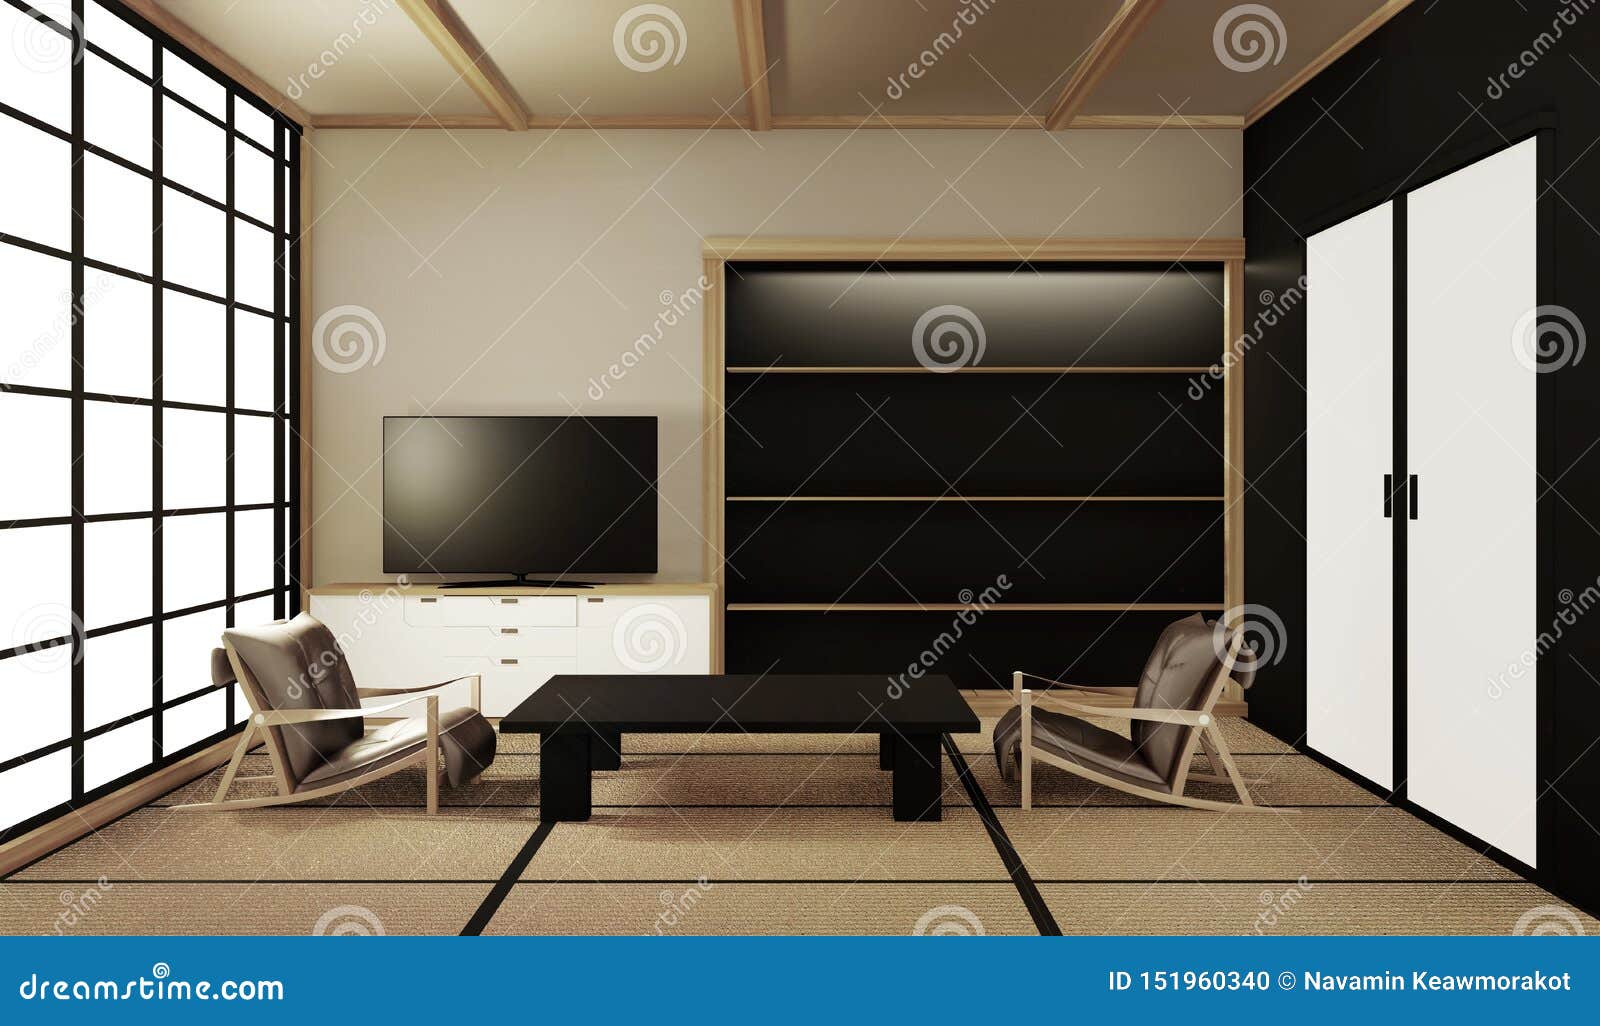 Interior Design Modern Living Room With Table On Tatami Mat